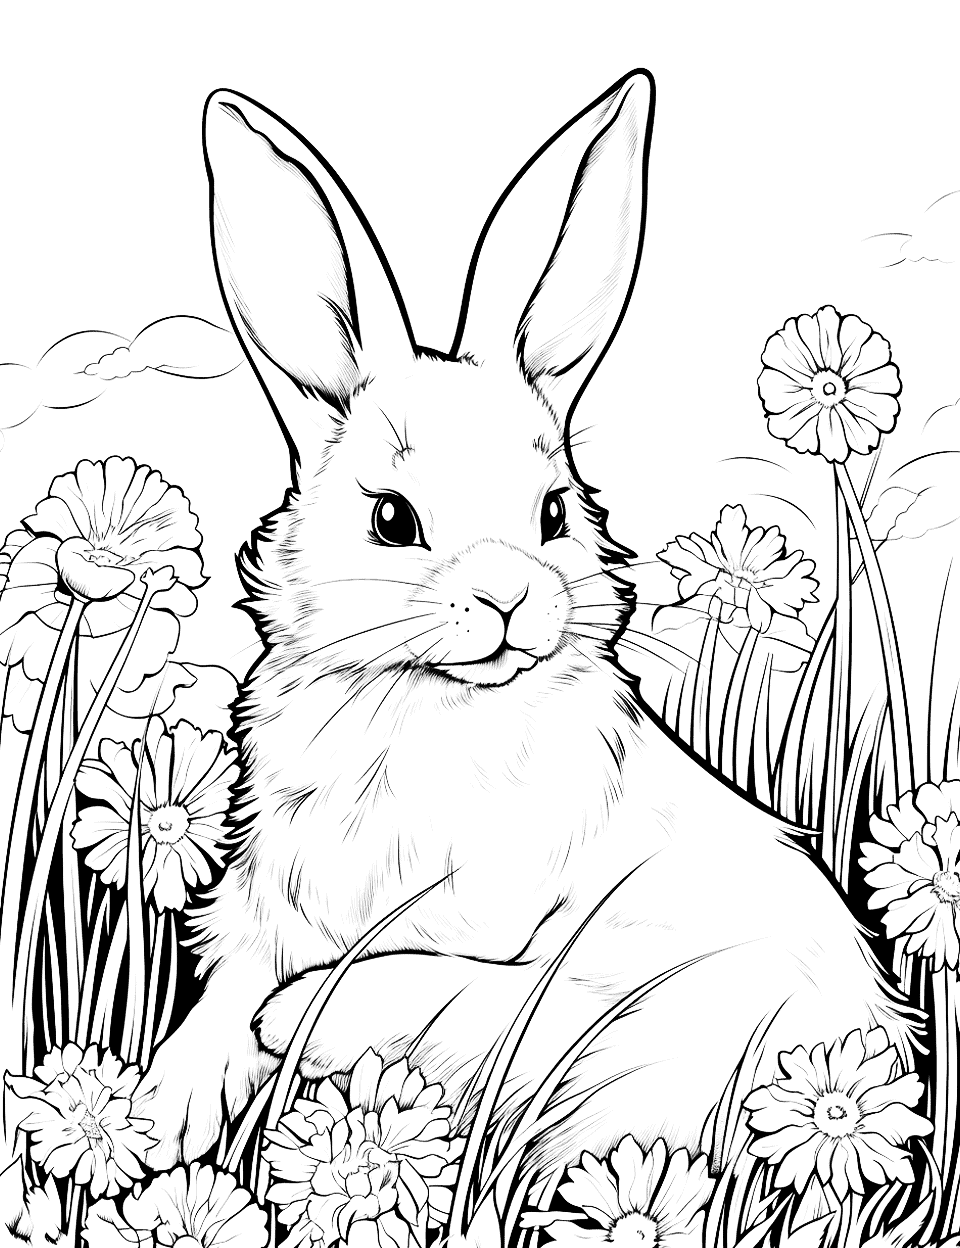 Rabbit's Meadow Rest Adult Coloring Page - A rabbit resting among flowers.